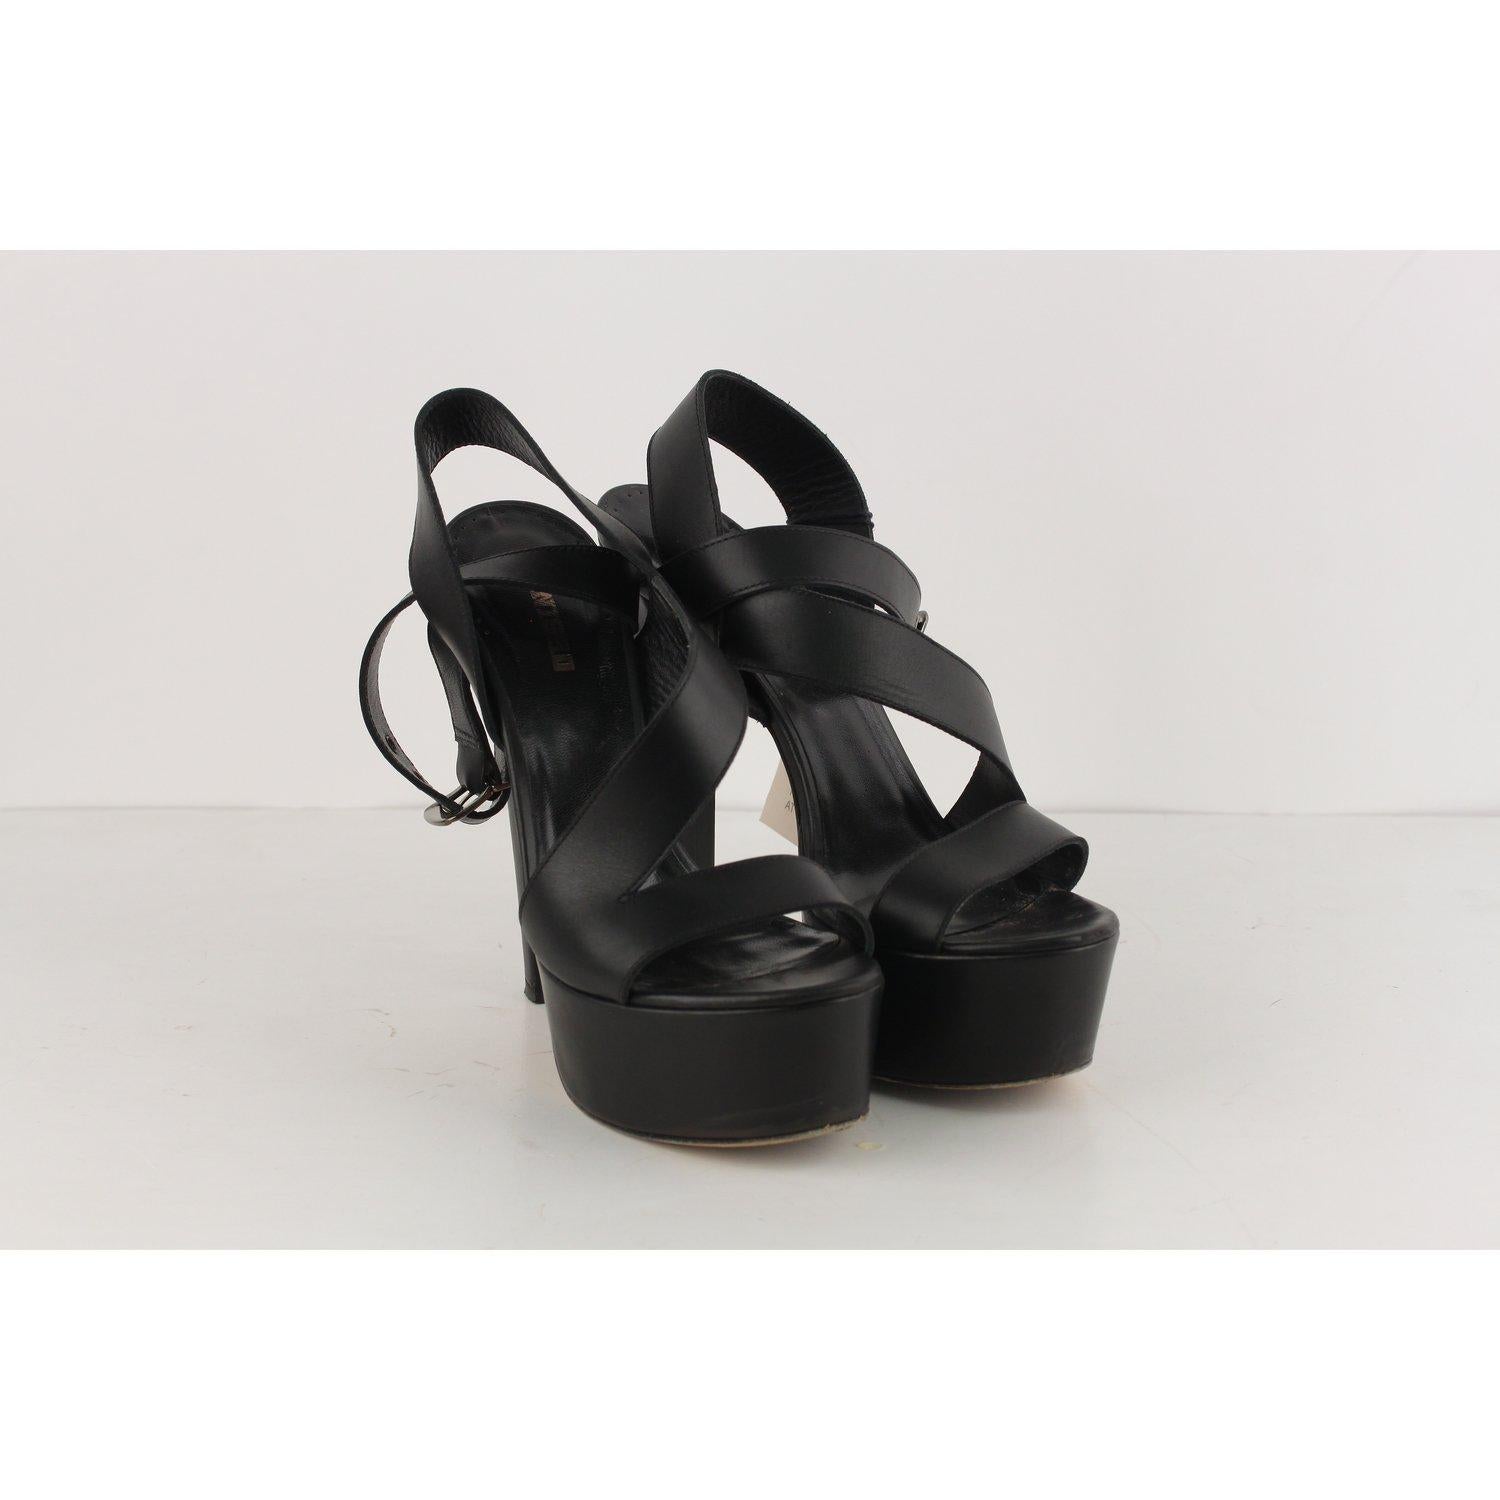 MATERIAL: Leather COLOR: Black MODEL: Platform Heels GENDER: Women SIZE: 38 COUNTRY OF MANUFACTURE: Italy Condition CONDITION DETAILS: B :GOOD CONDITION - Some light wear of use - some wear of use on the insoles, some wear of use on the outsoles -